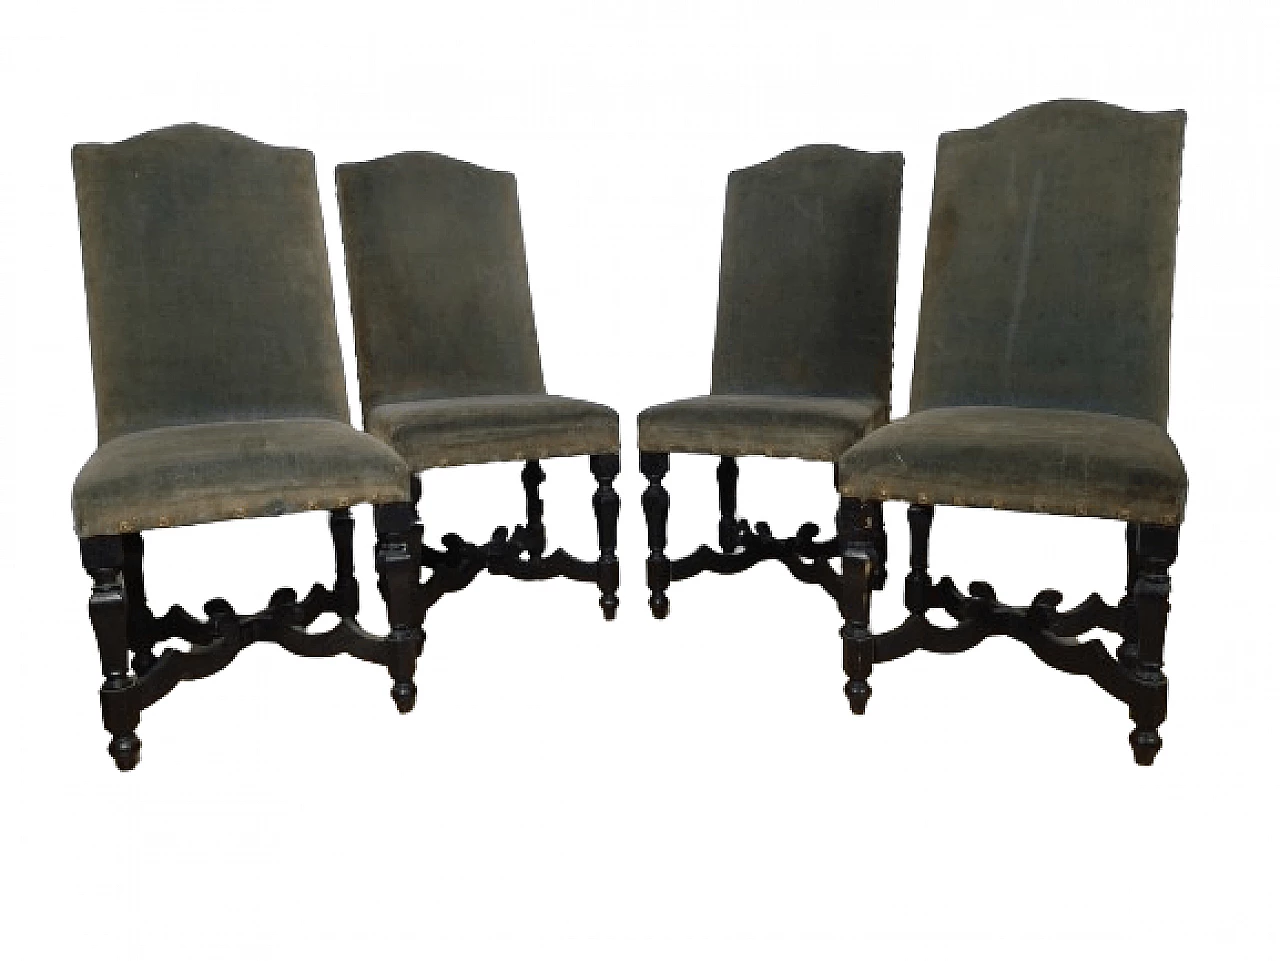 4 Rocchetto chairs in ebonised wood, 18th century 1